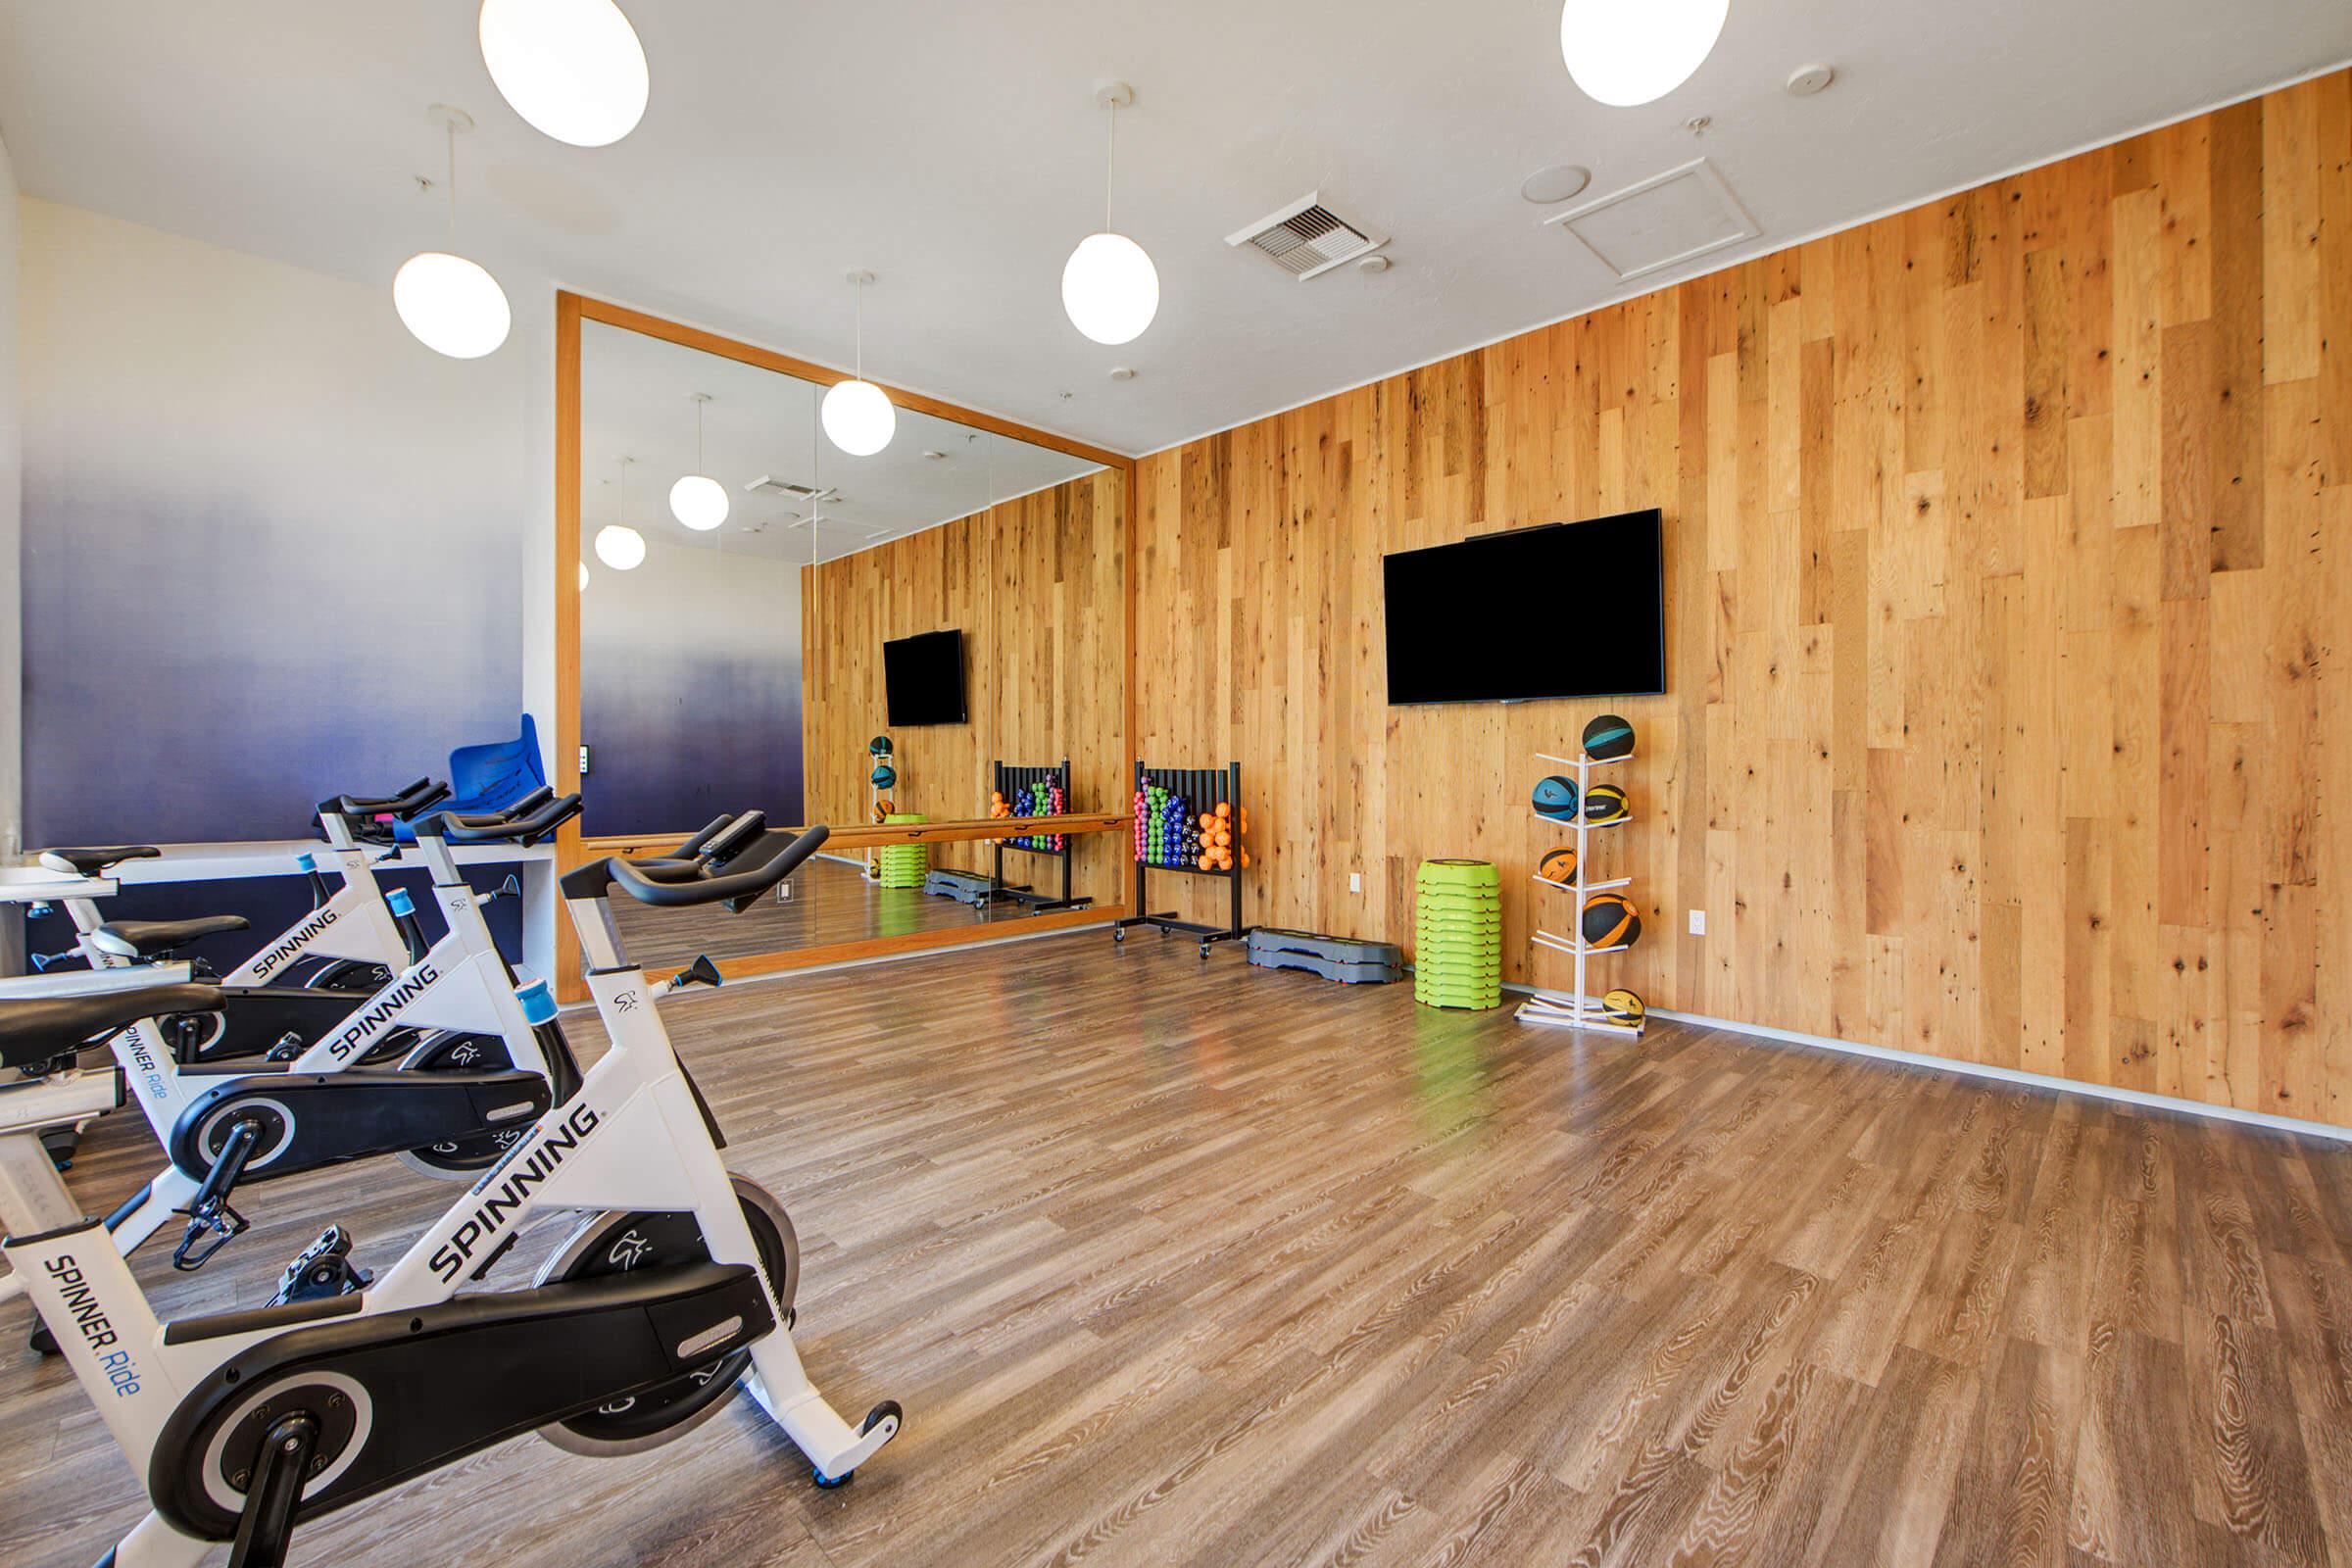 Fitness center at Rancho Cucamonga apartment complex